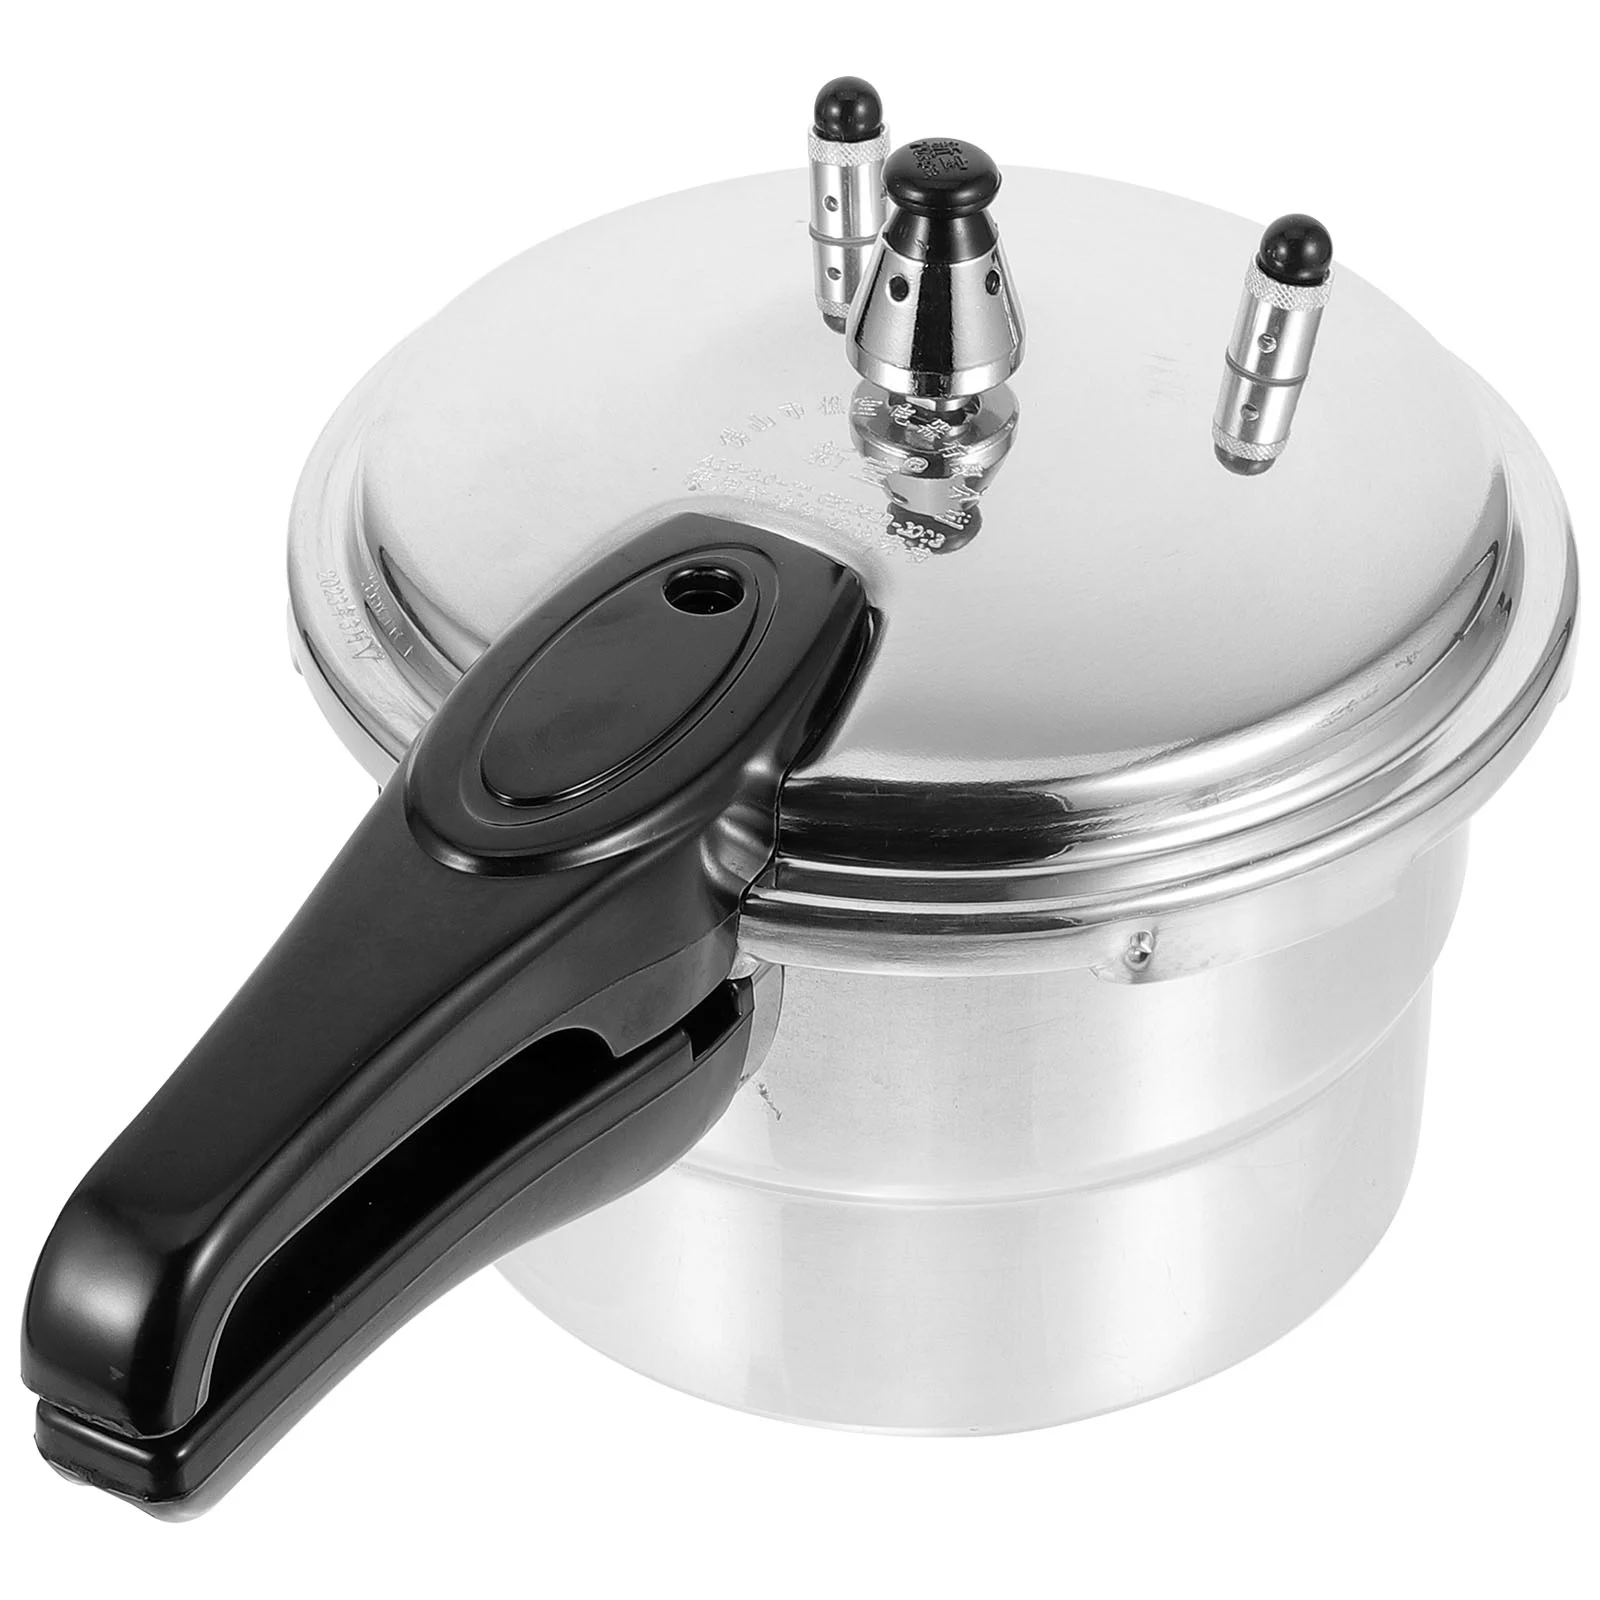 

Stainless Steel Pressure Cooker High Mini Steamer Tall Pot Gas Stove Canned Veggies Safe Aluminum Canning